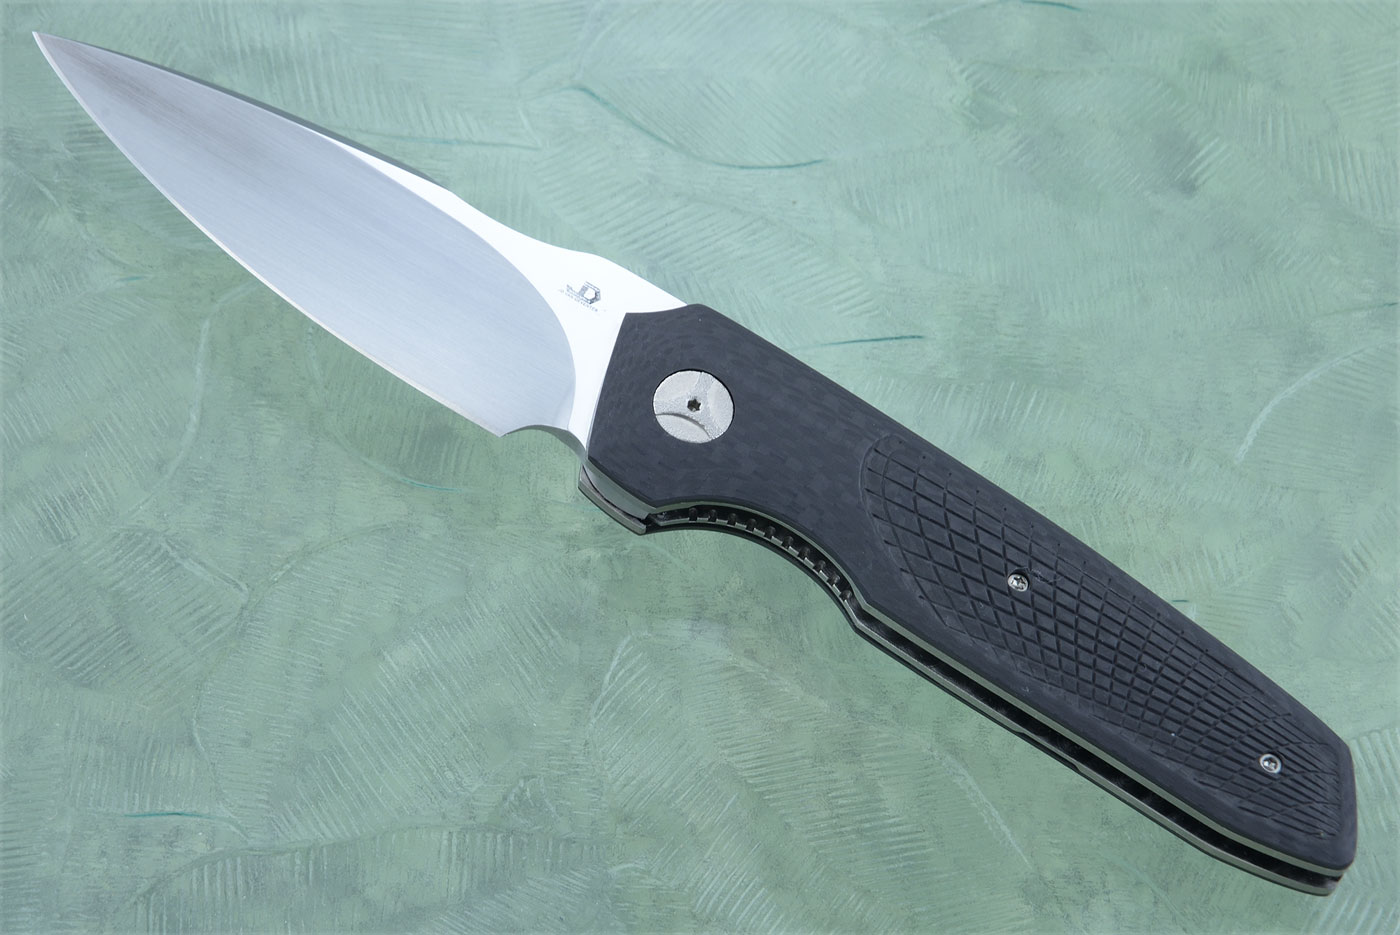 Silver Front Flipper with Fluted Carbon Fiber (IKBS) - CPM-154